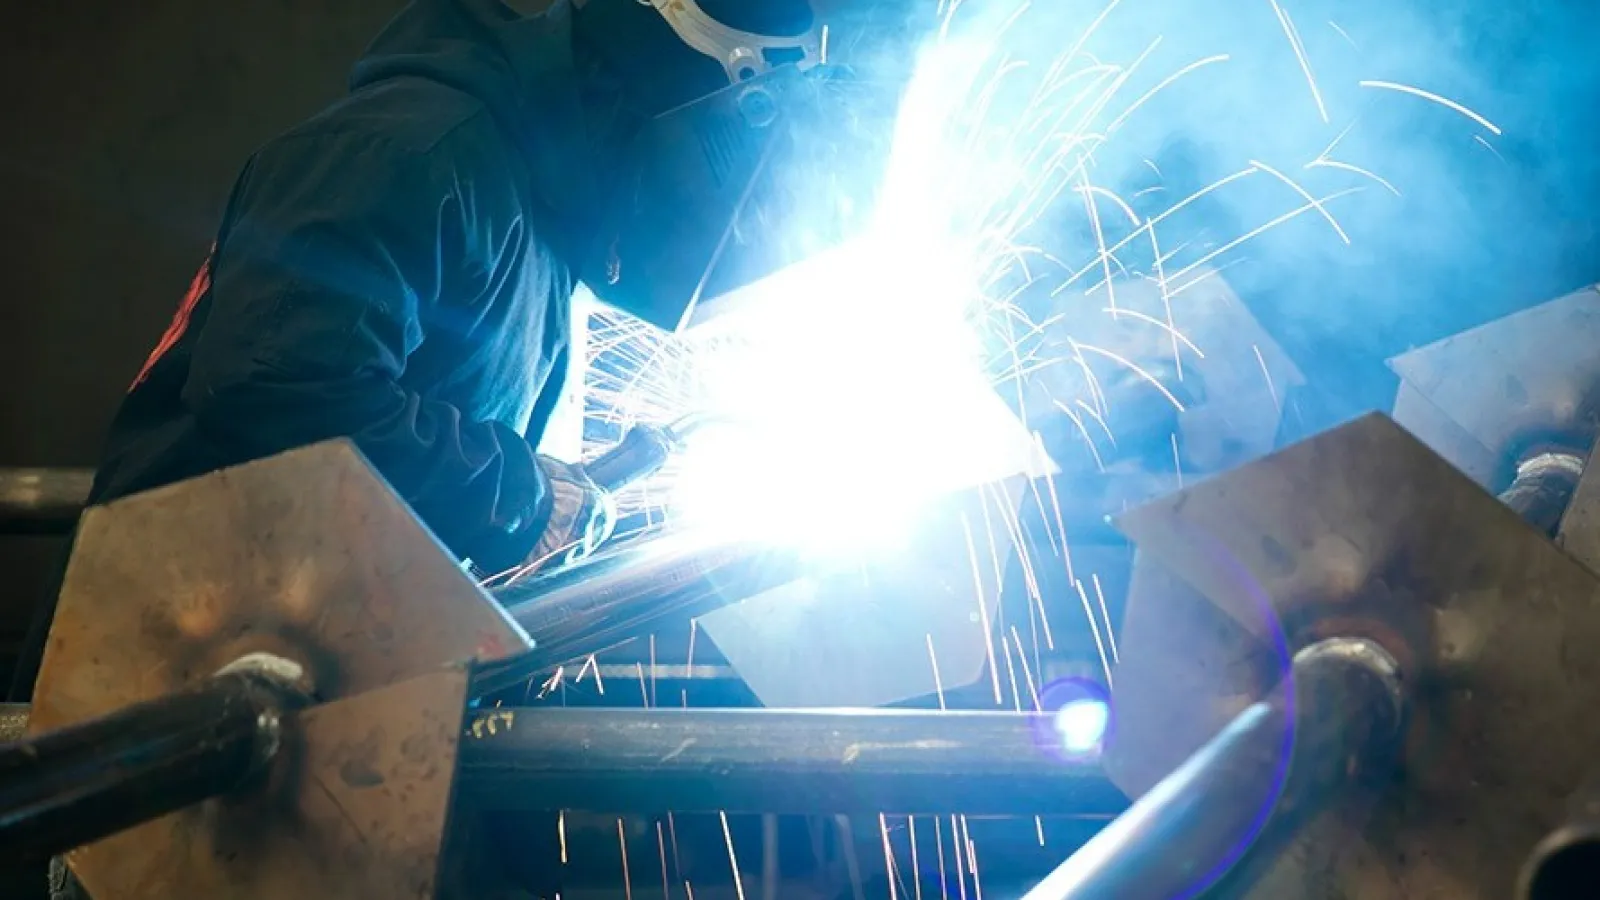 a person welding with sparks